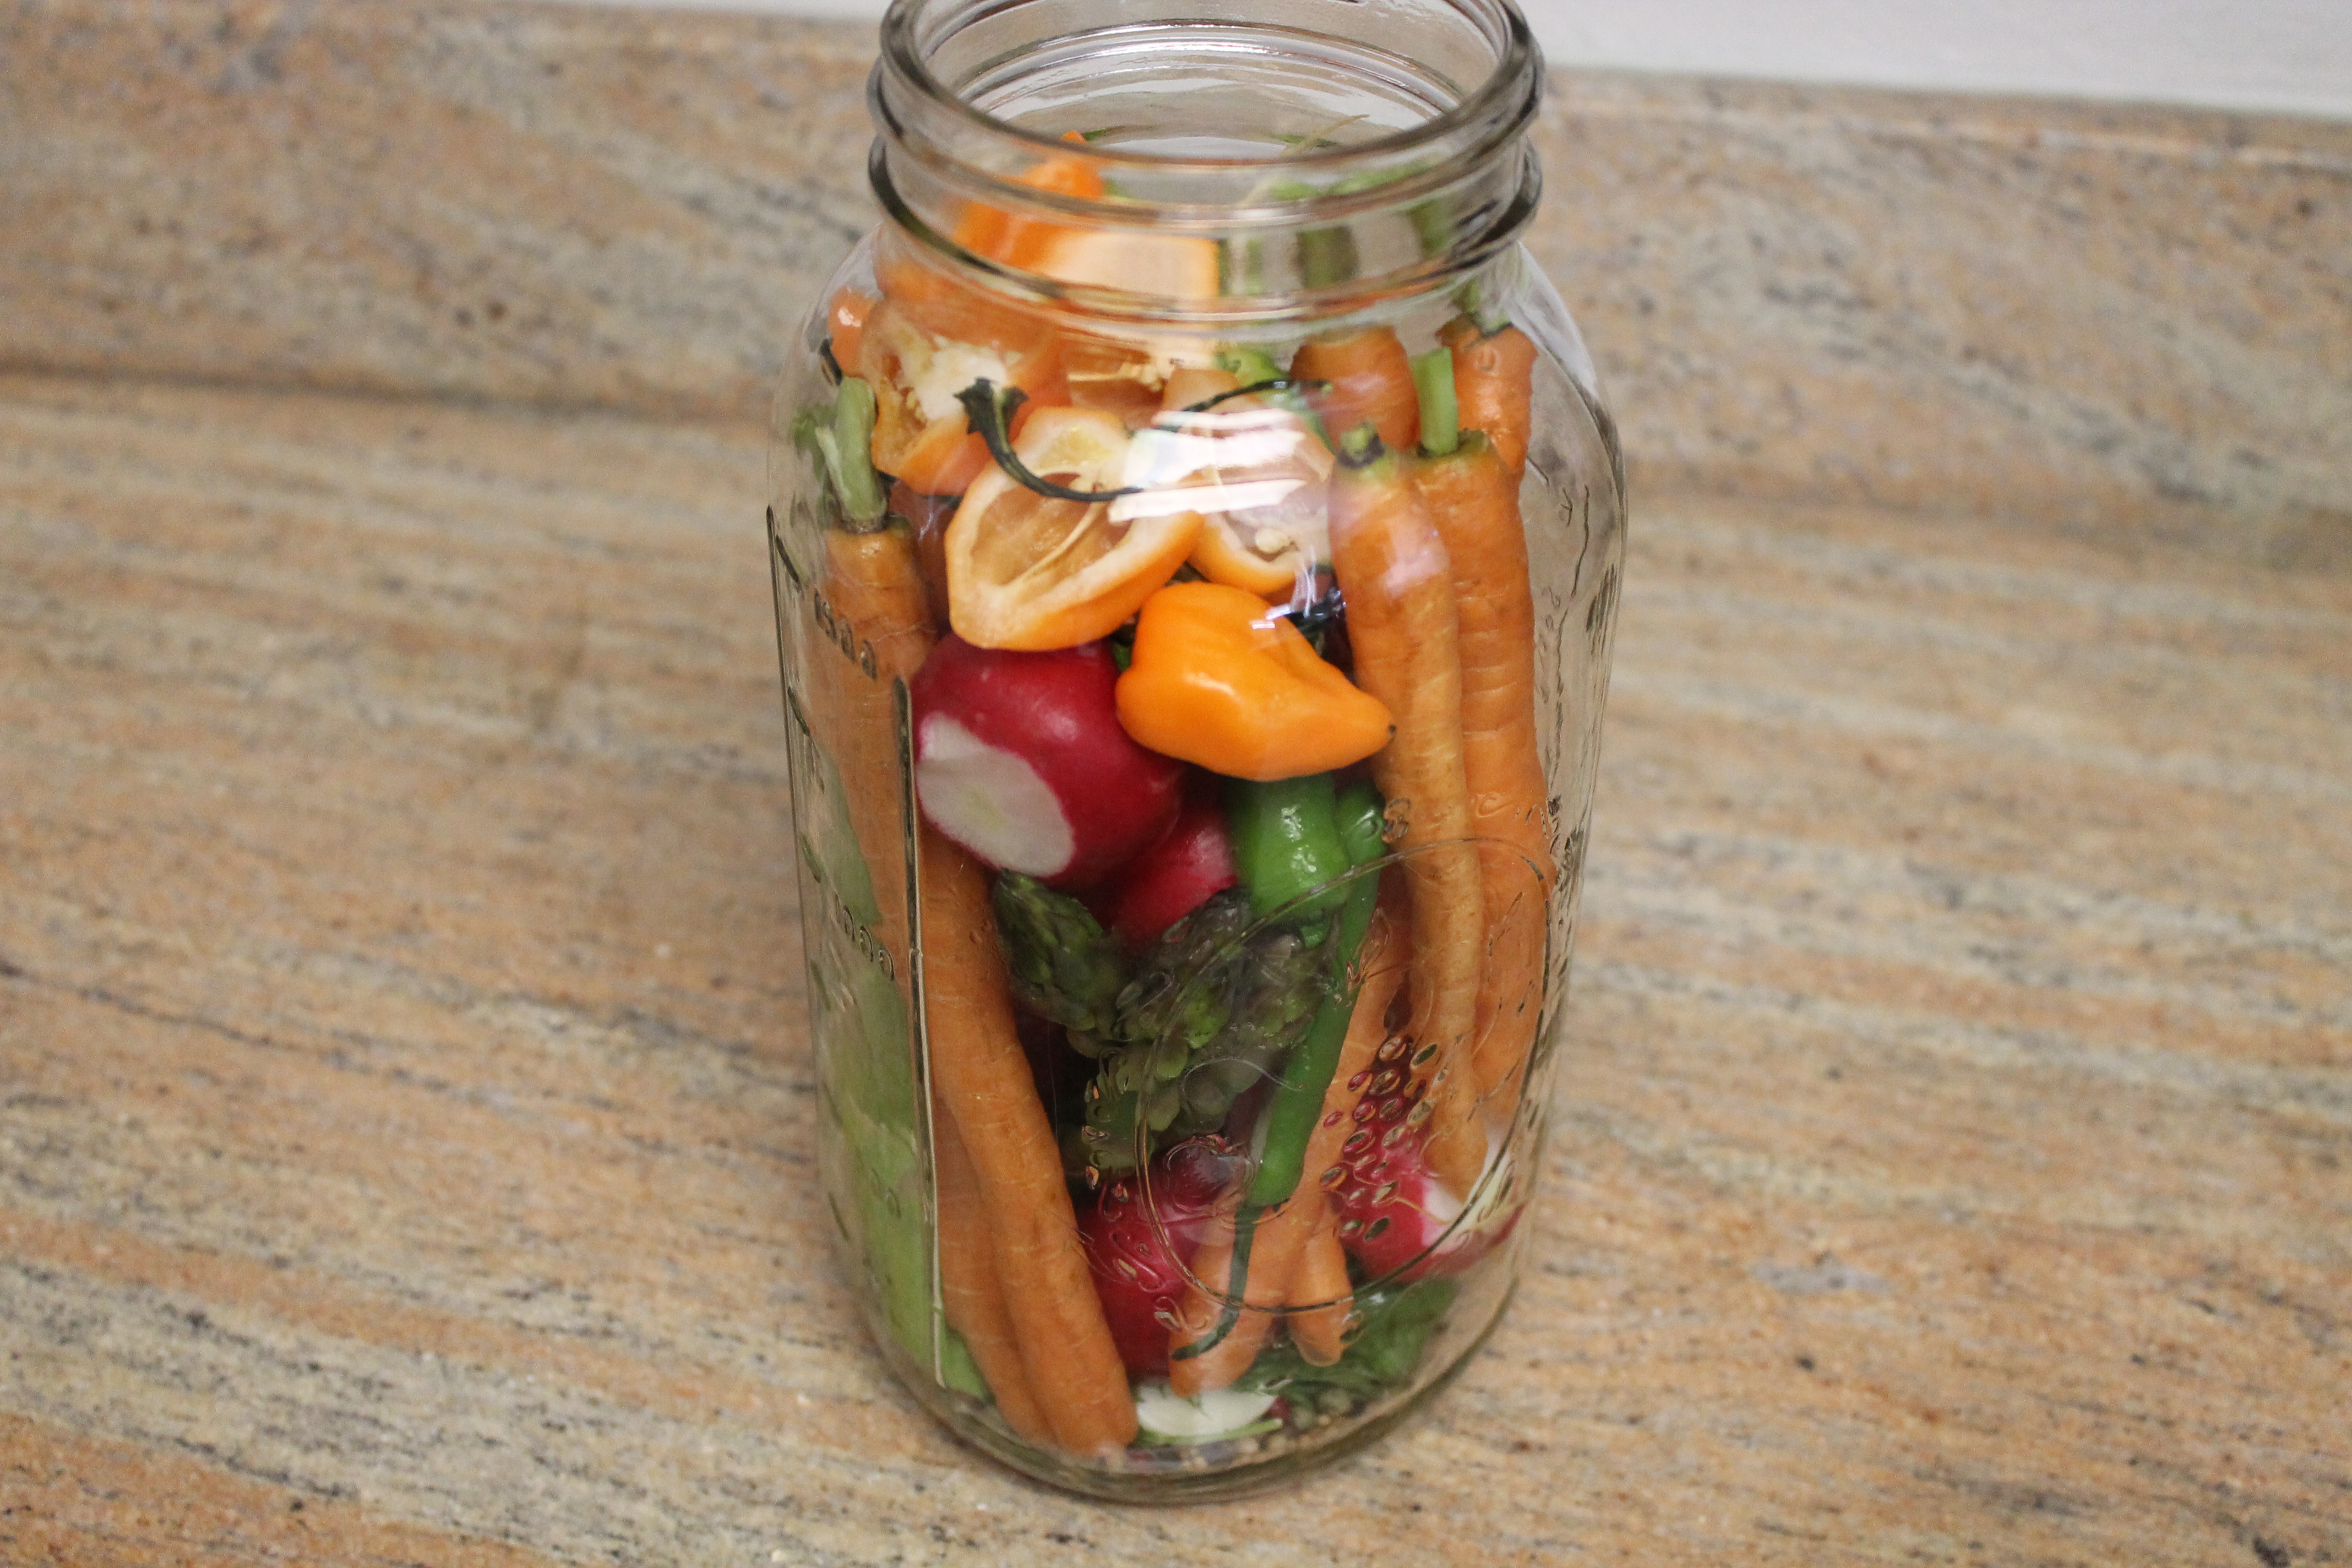 The Hottest Pickled Vegetables In The World